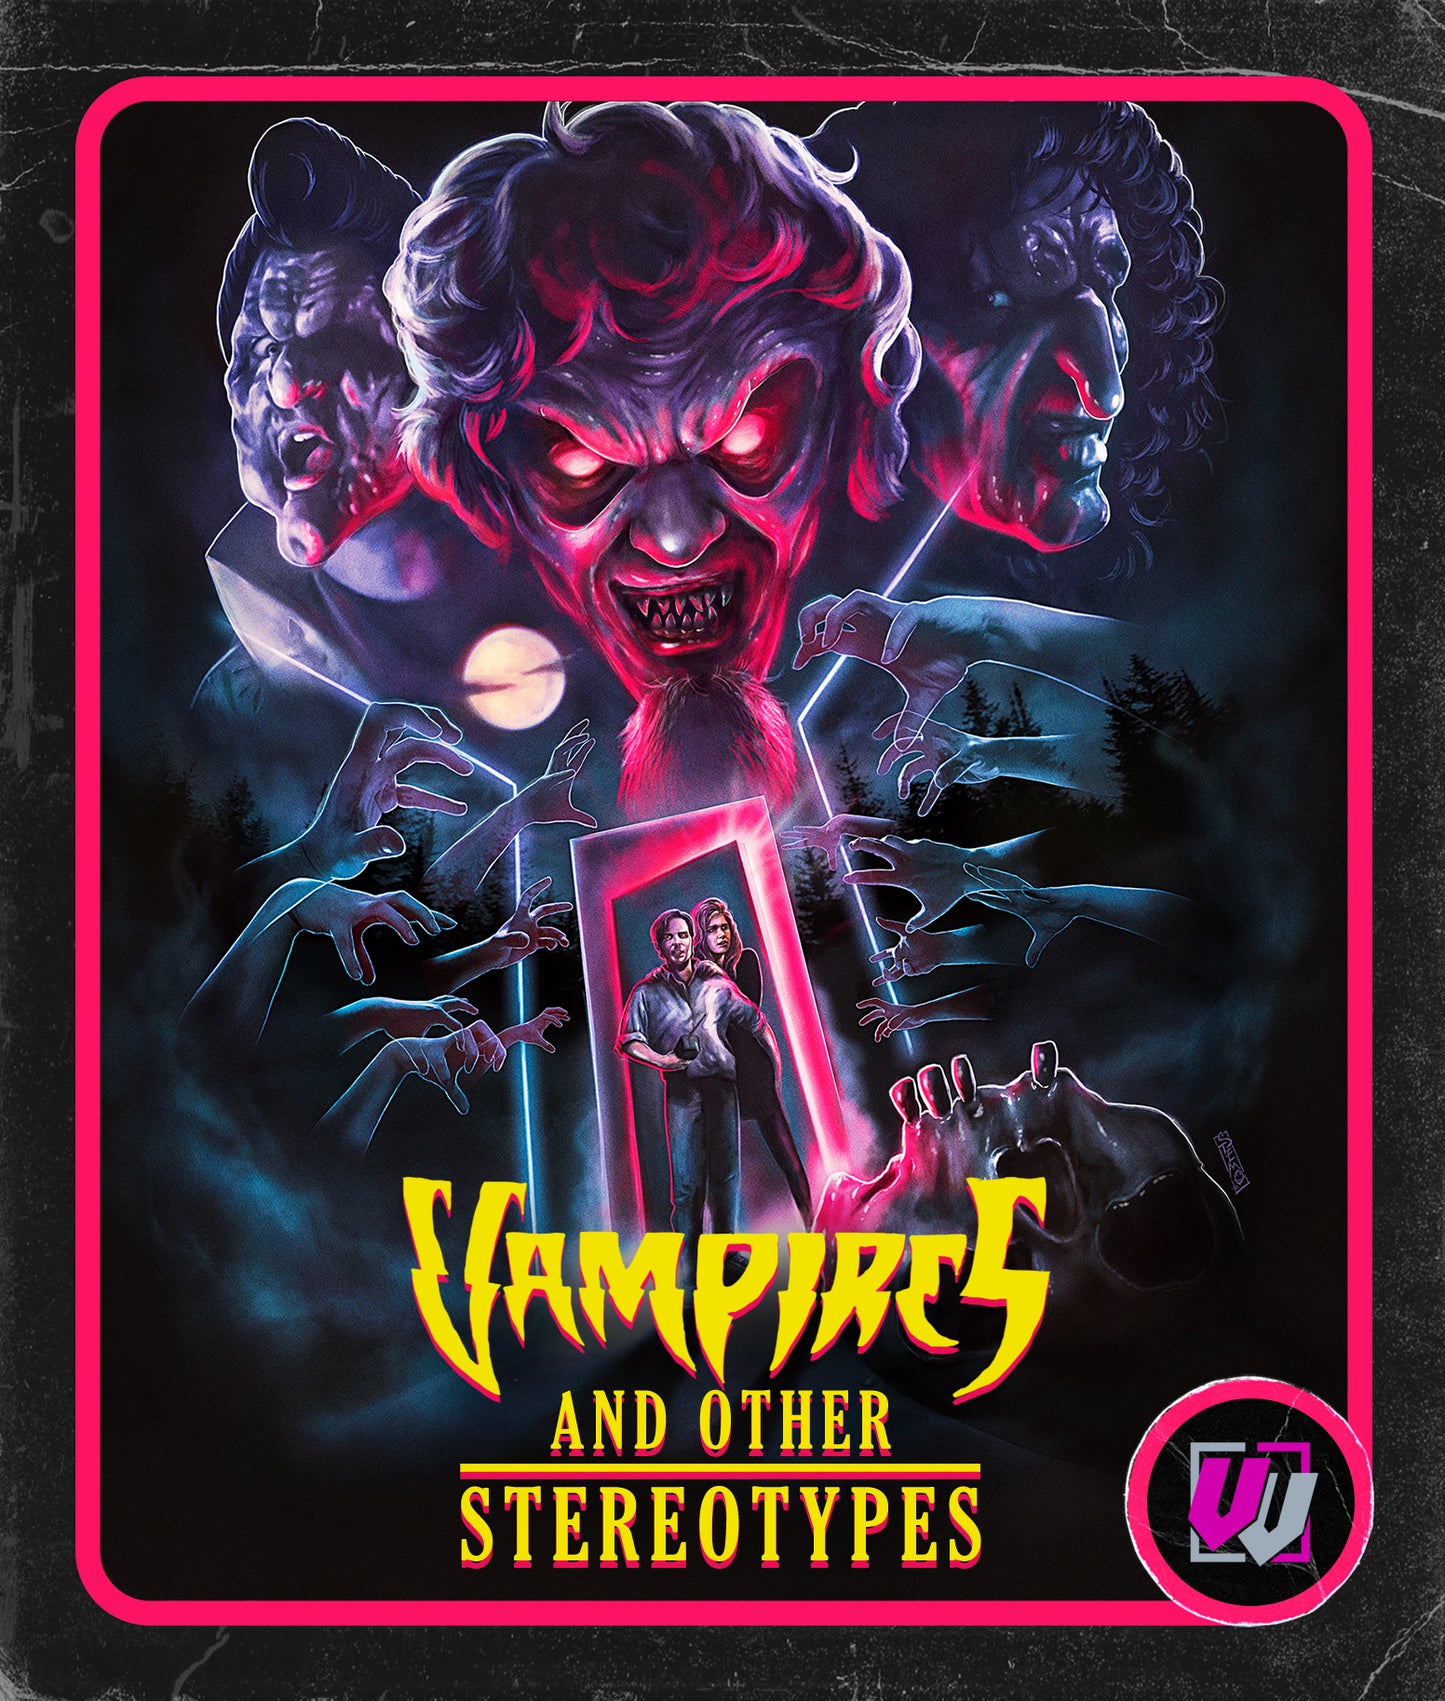 Vampires And Other Stereotypes Collector's Edition Blu-ray (Visual Vengeance)